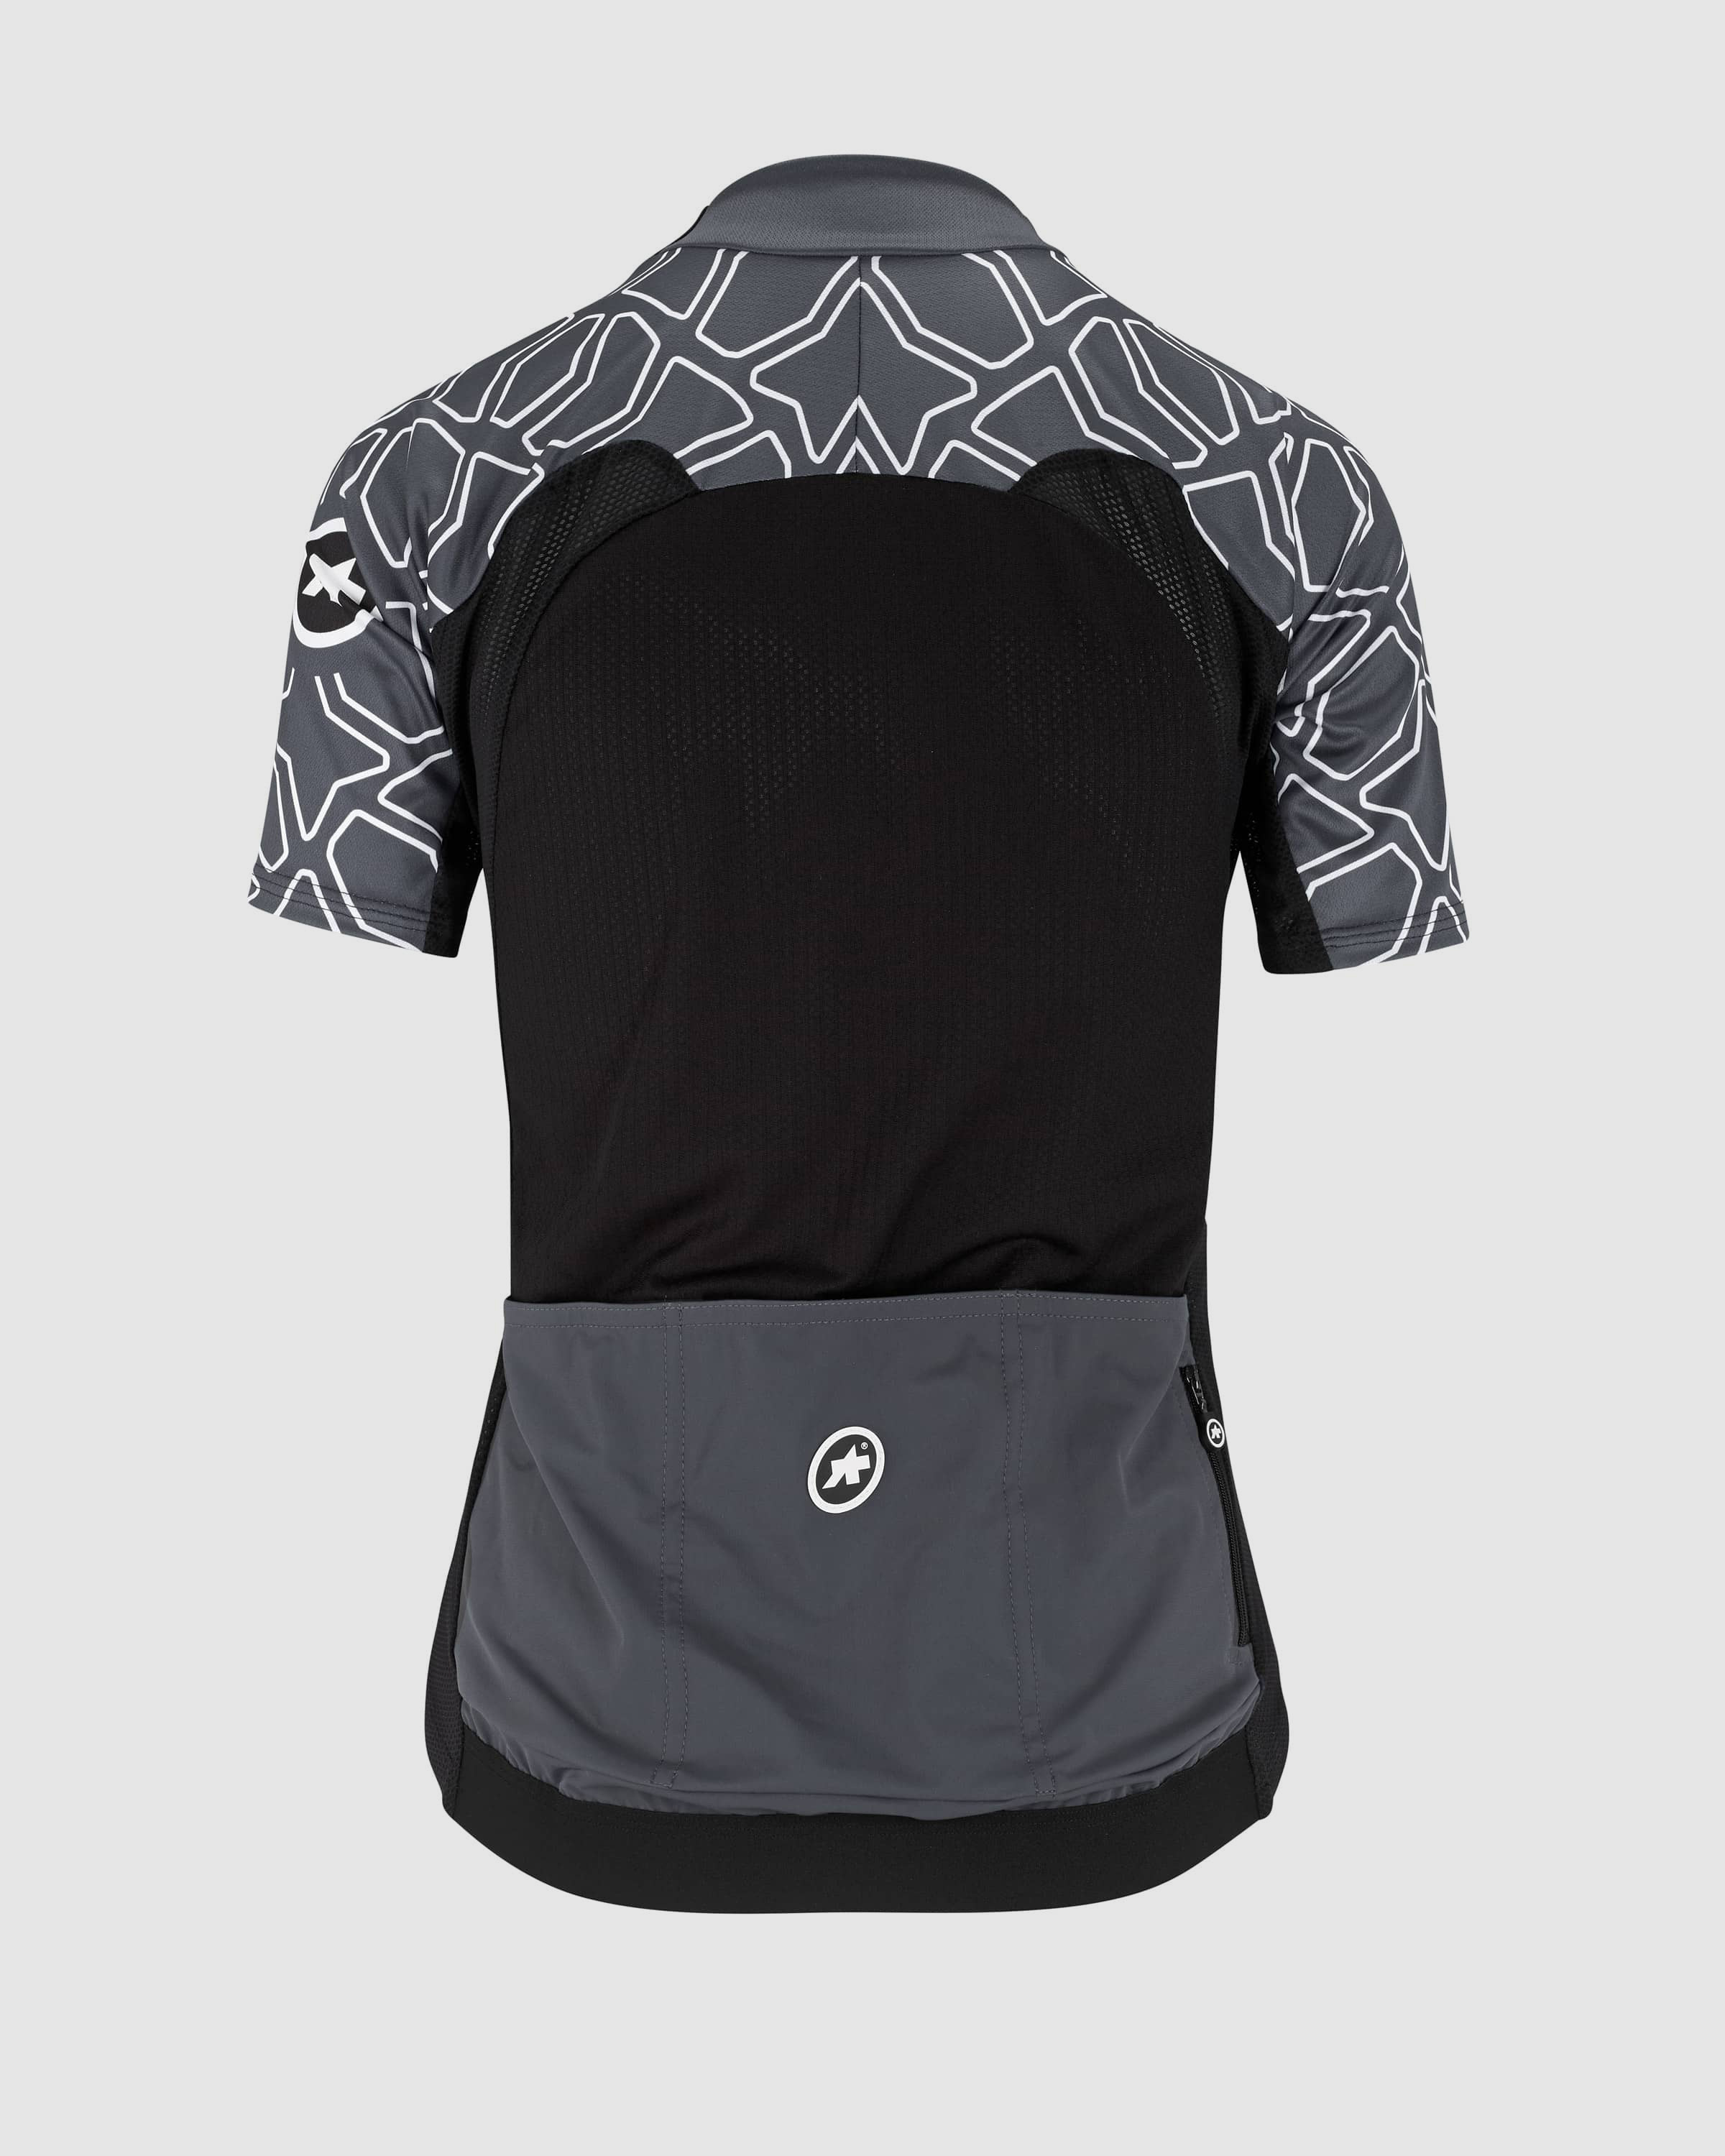 XC short sleeve jersey woman - ASSOS Of Switzerland - Official Outlet